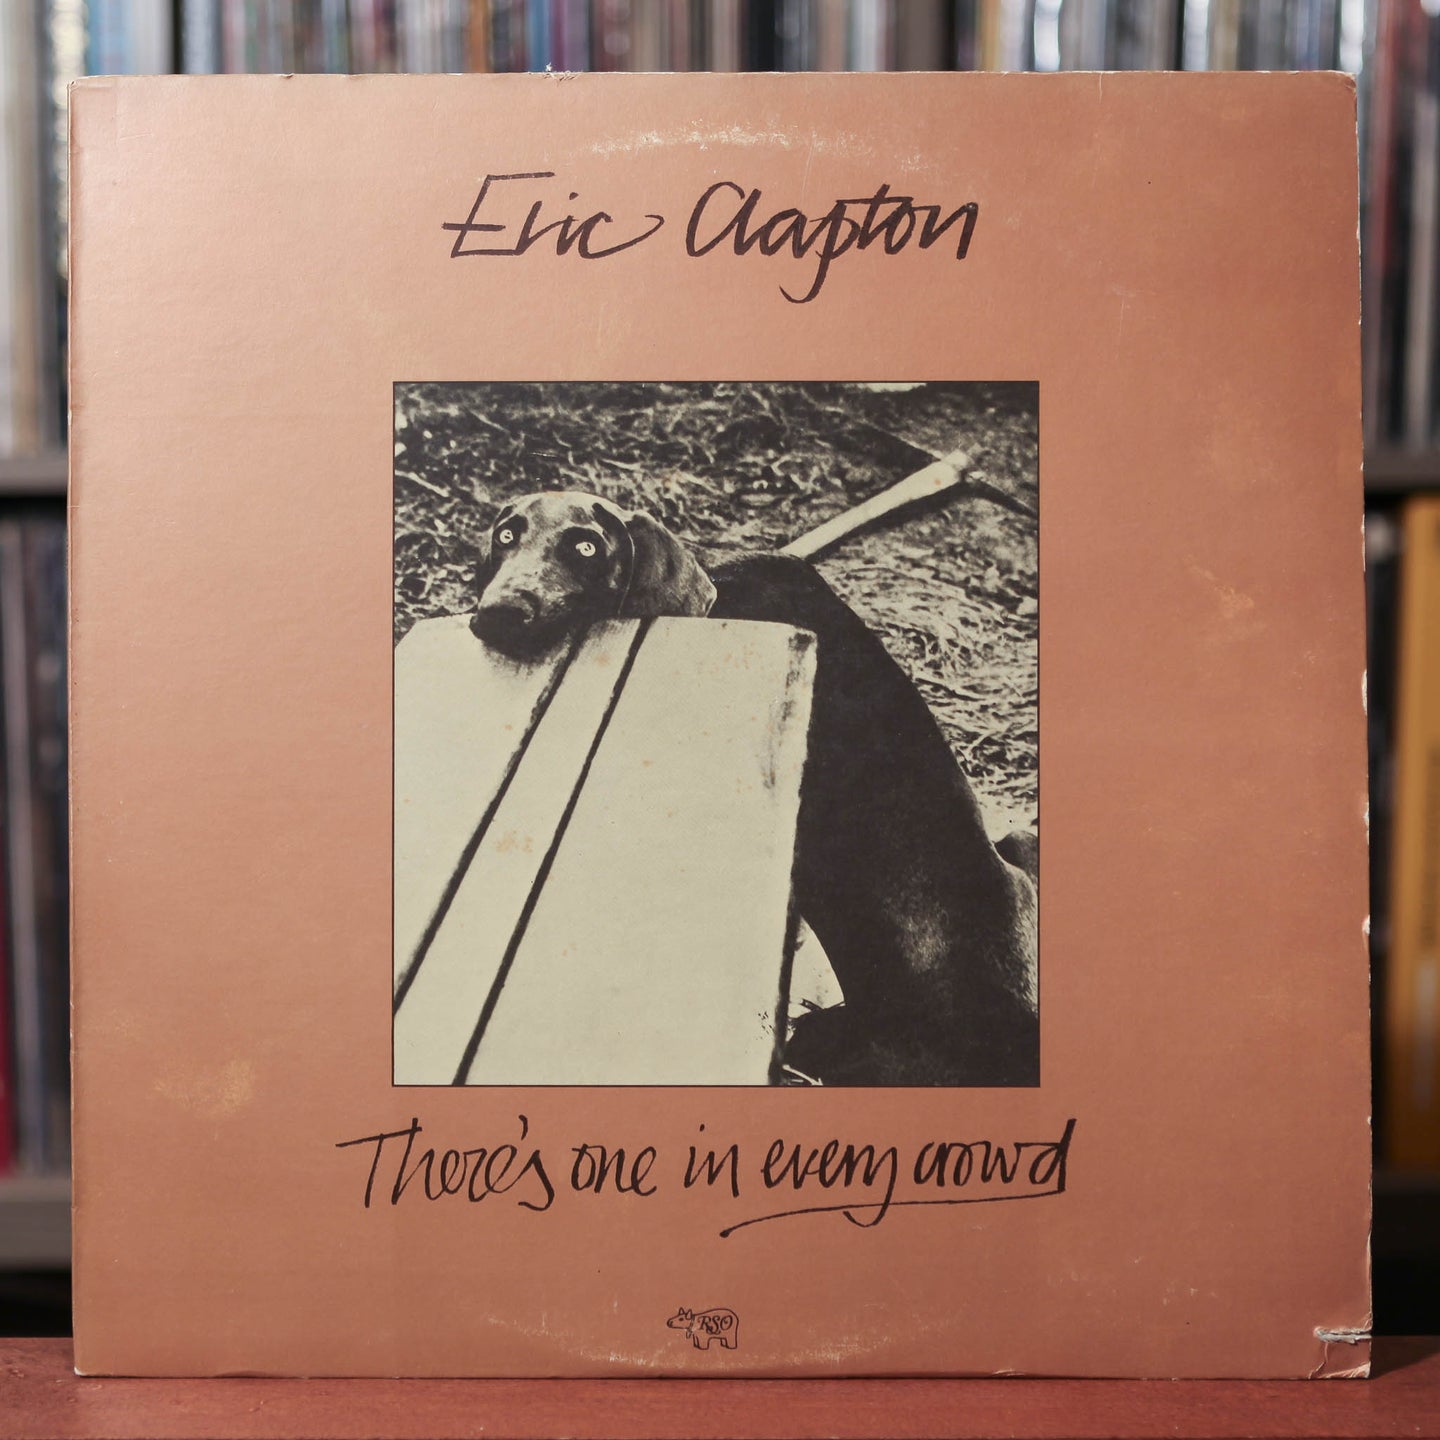 Eric Clapton - There's One In Every Crowd - 1975 RSO, VG/VG+